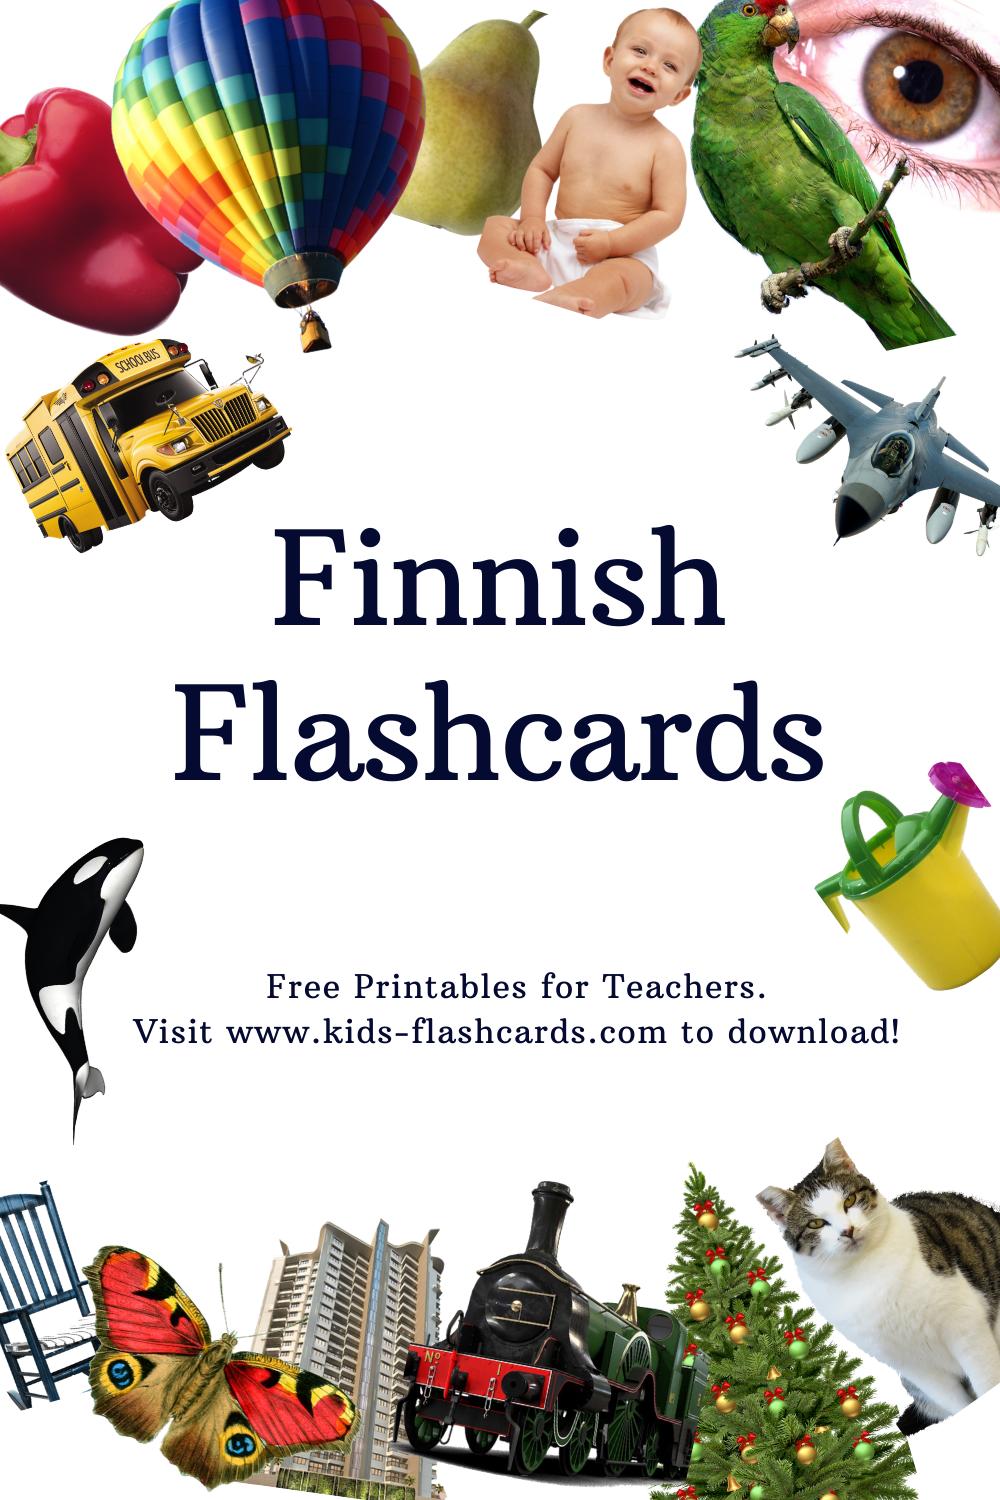 Worksheets to learn Finnish language